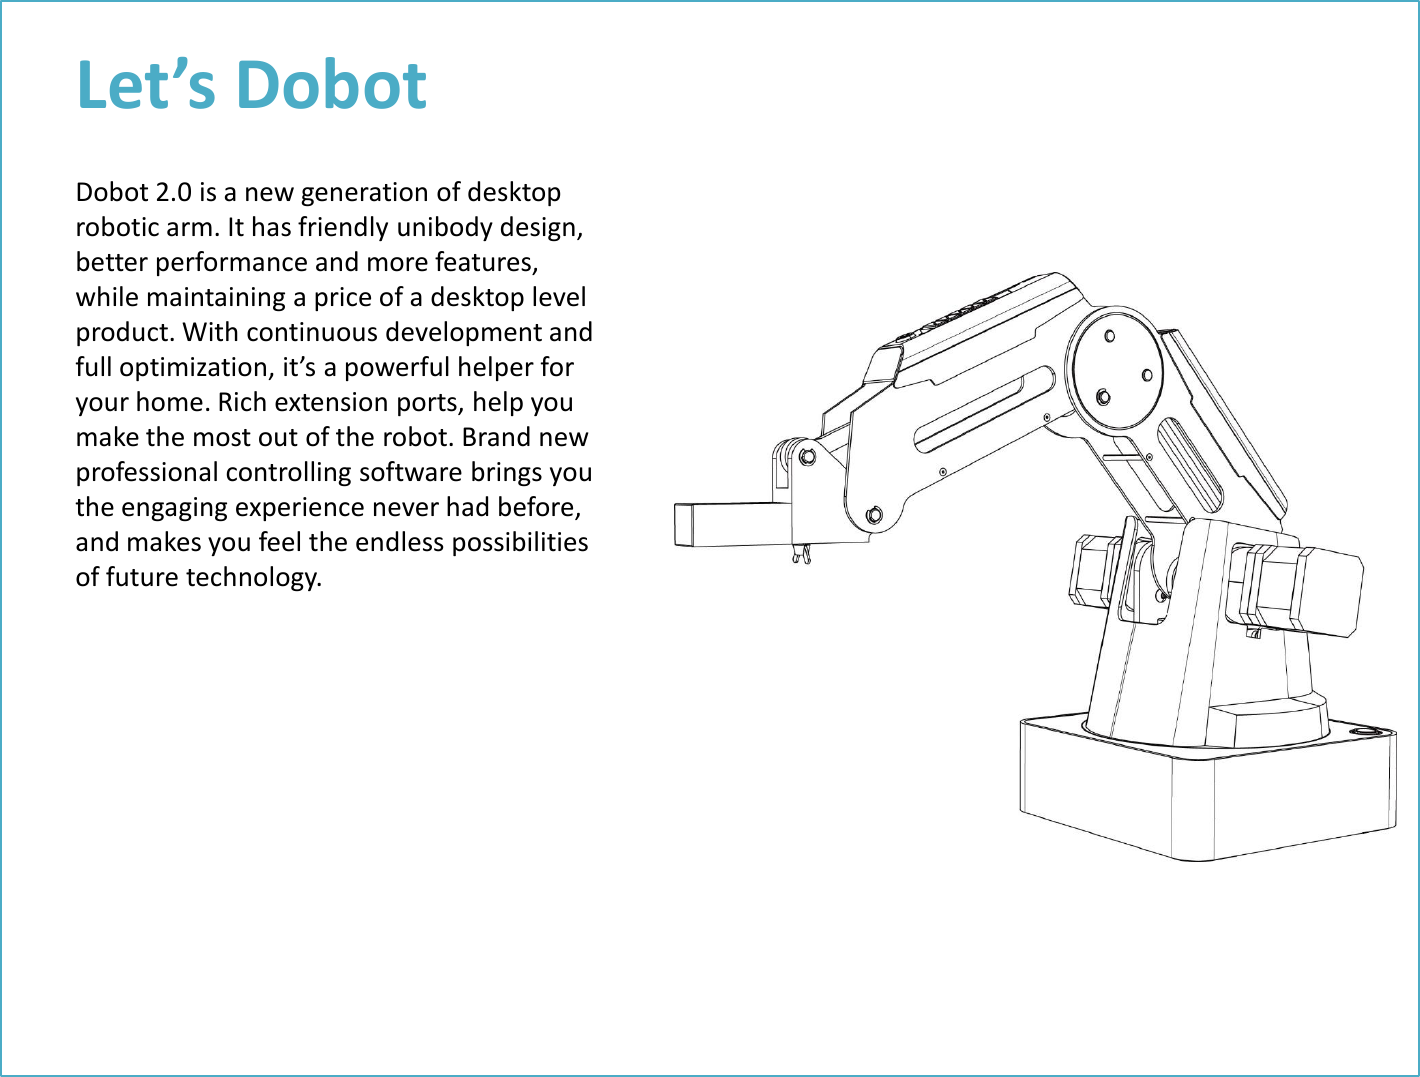 Let’s Dobot Dobot 2.0 is a new generation of desktop robotic arm. It has friendly unibody design, better performance and more features, while maintaining a price of a desktop level product. With continuous development and full optimization, it’s a powerful helper for your home. Rich extension ports, help you make the most out of the robot. Brand new professional controlling software brings you the engaging experience never had before, and makes you feel the endless possibilities of future technology. 